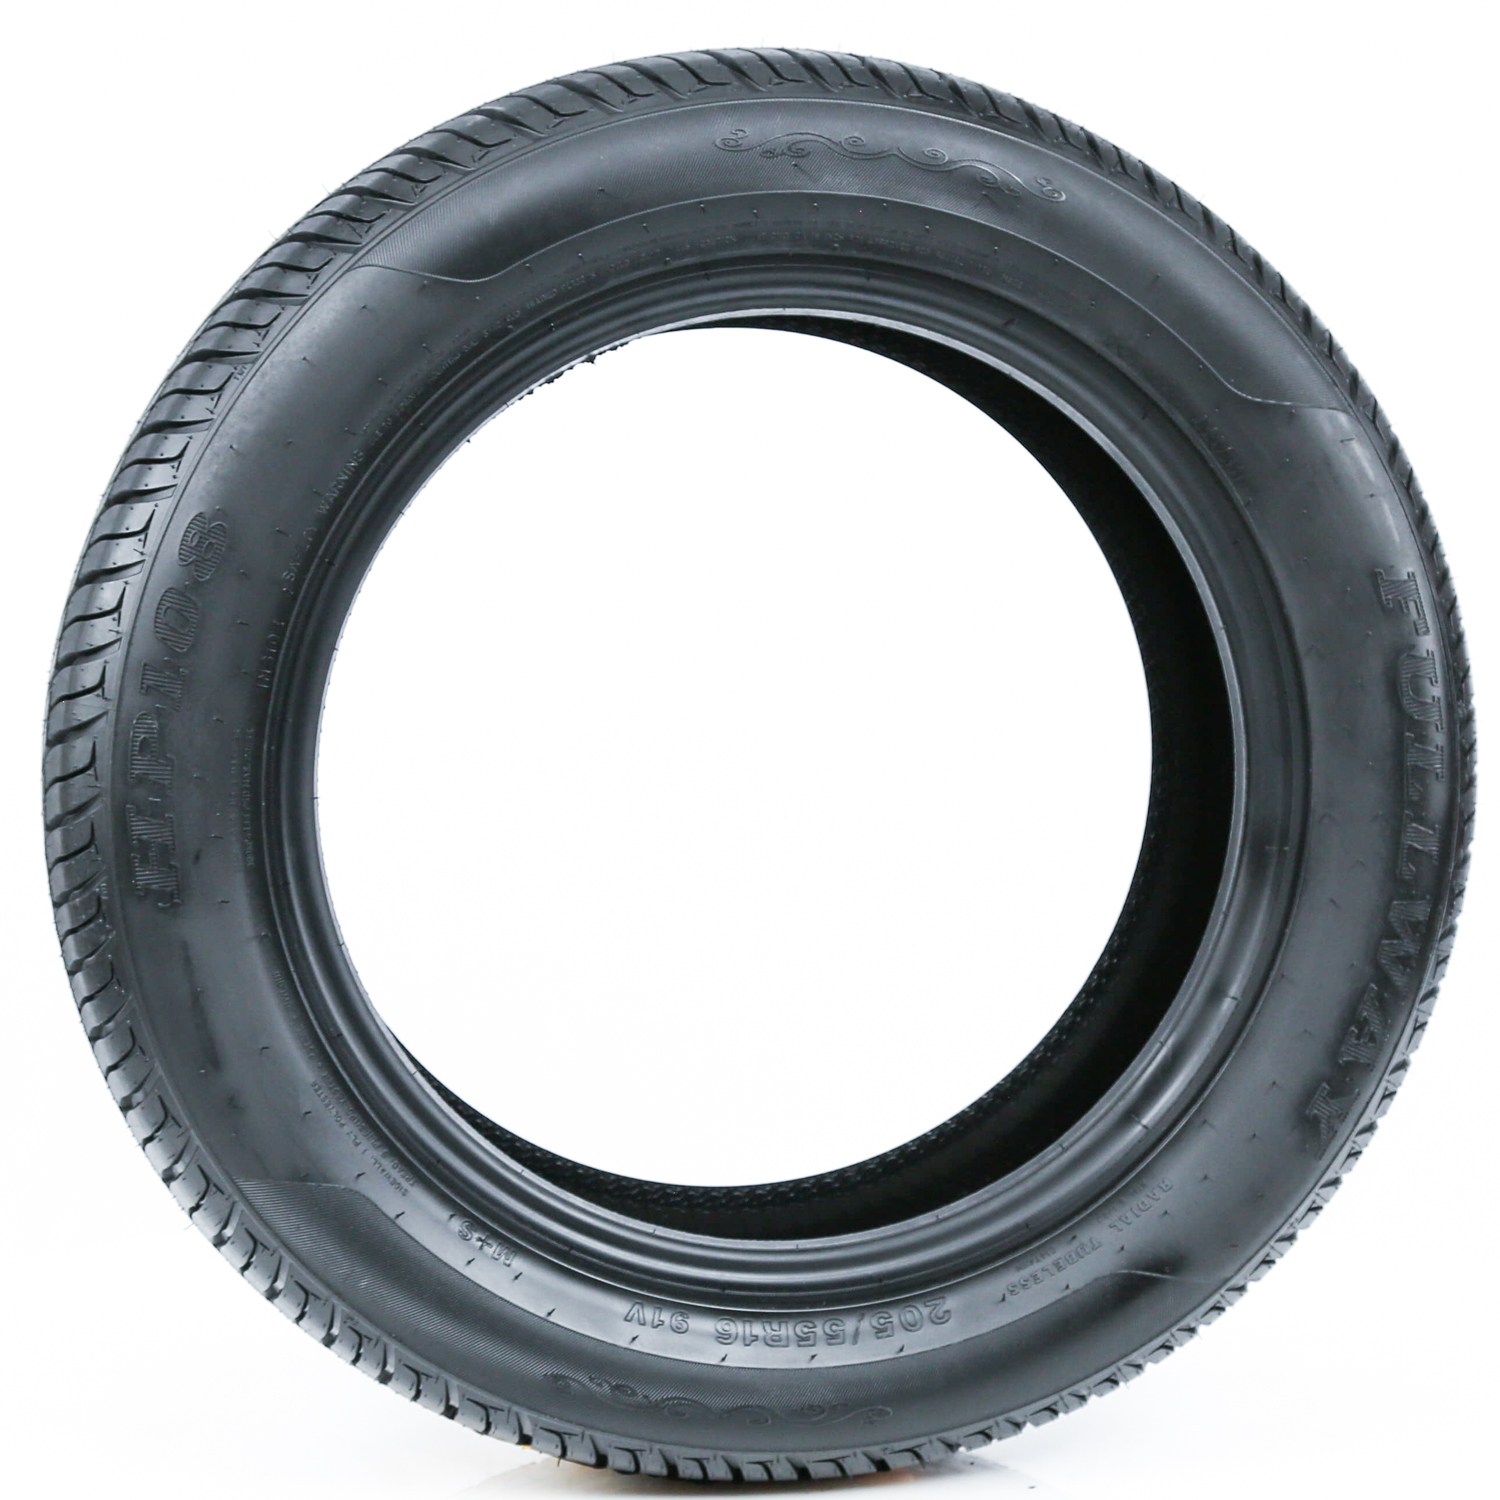 1 New Fullway HP108 205/55R16 91V All Season UHP Performance Tires  HP1081604 / 205/55/16 / 2055516 